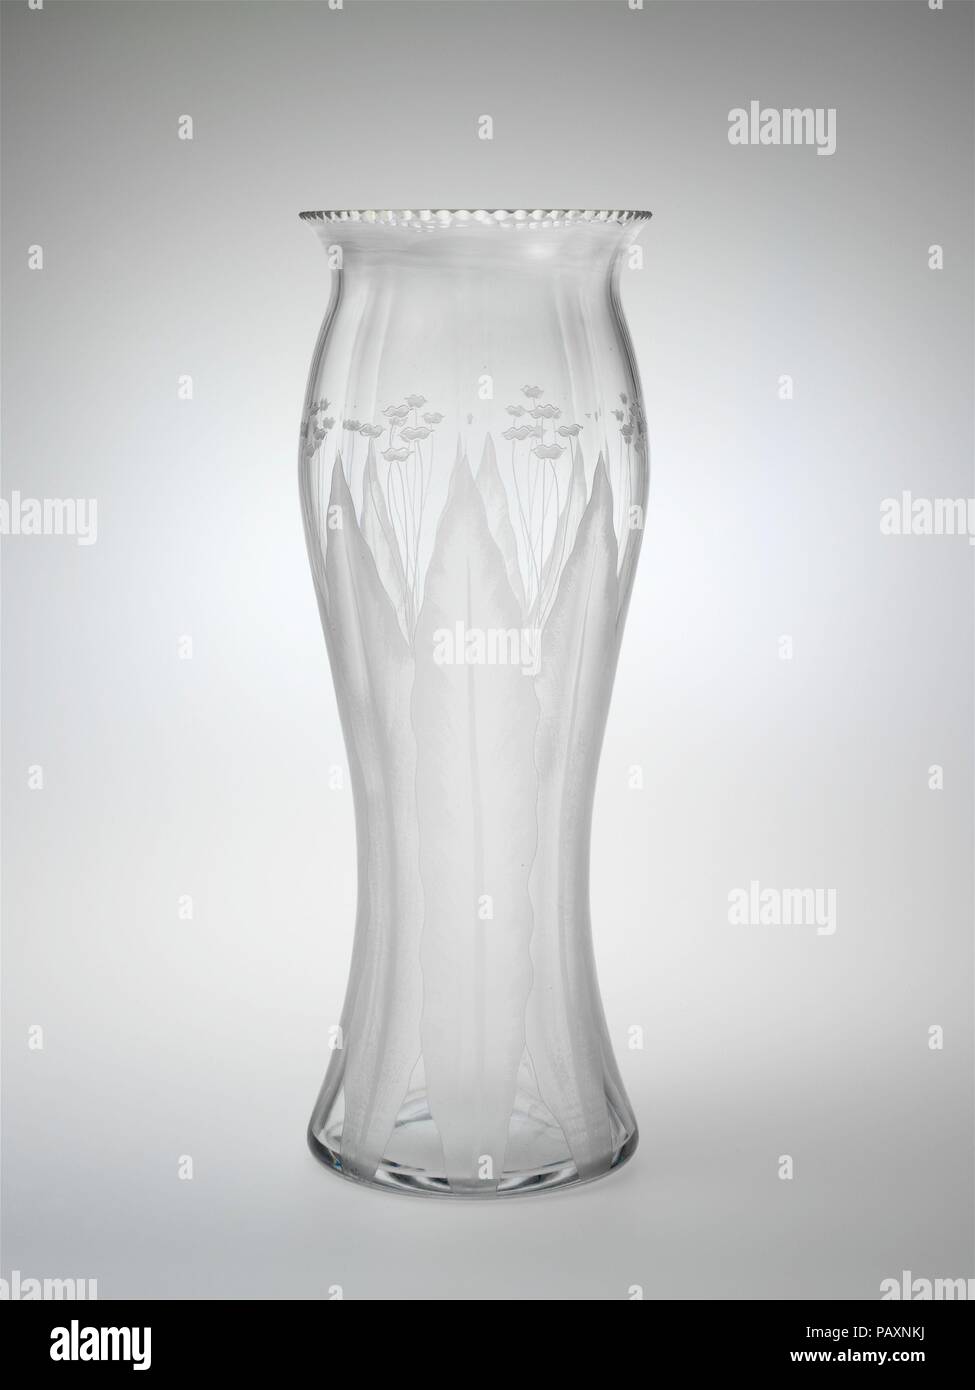 Vase. Culture: American. Dimensions: H. 14 1/4 in. (36.2 cm); Diam. 15 in. (38.1 cm). Manufacturer: C. Dorflinger and Sons (American, White Mills, Pennsylviania, 1881-1921). Date: 1905-15.  In contrast to the deeply cut and finely engraved decoration on the other glasses in this case, the simple, flat pattern on this vase was achieved by acid etching. The hard geometry of Dorflinger's cut patterns has been replaced here by representational floral designs, whose gentle curves suggest the Art Nouveau style. Museum: Metropolitan Museum of Art, New York, USA. Stock Photo